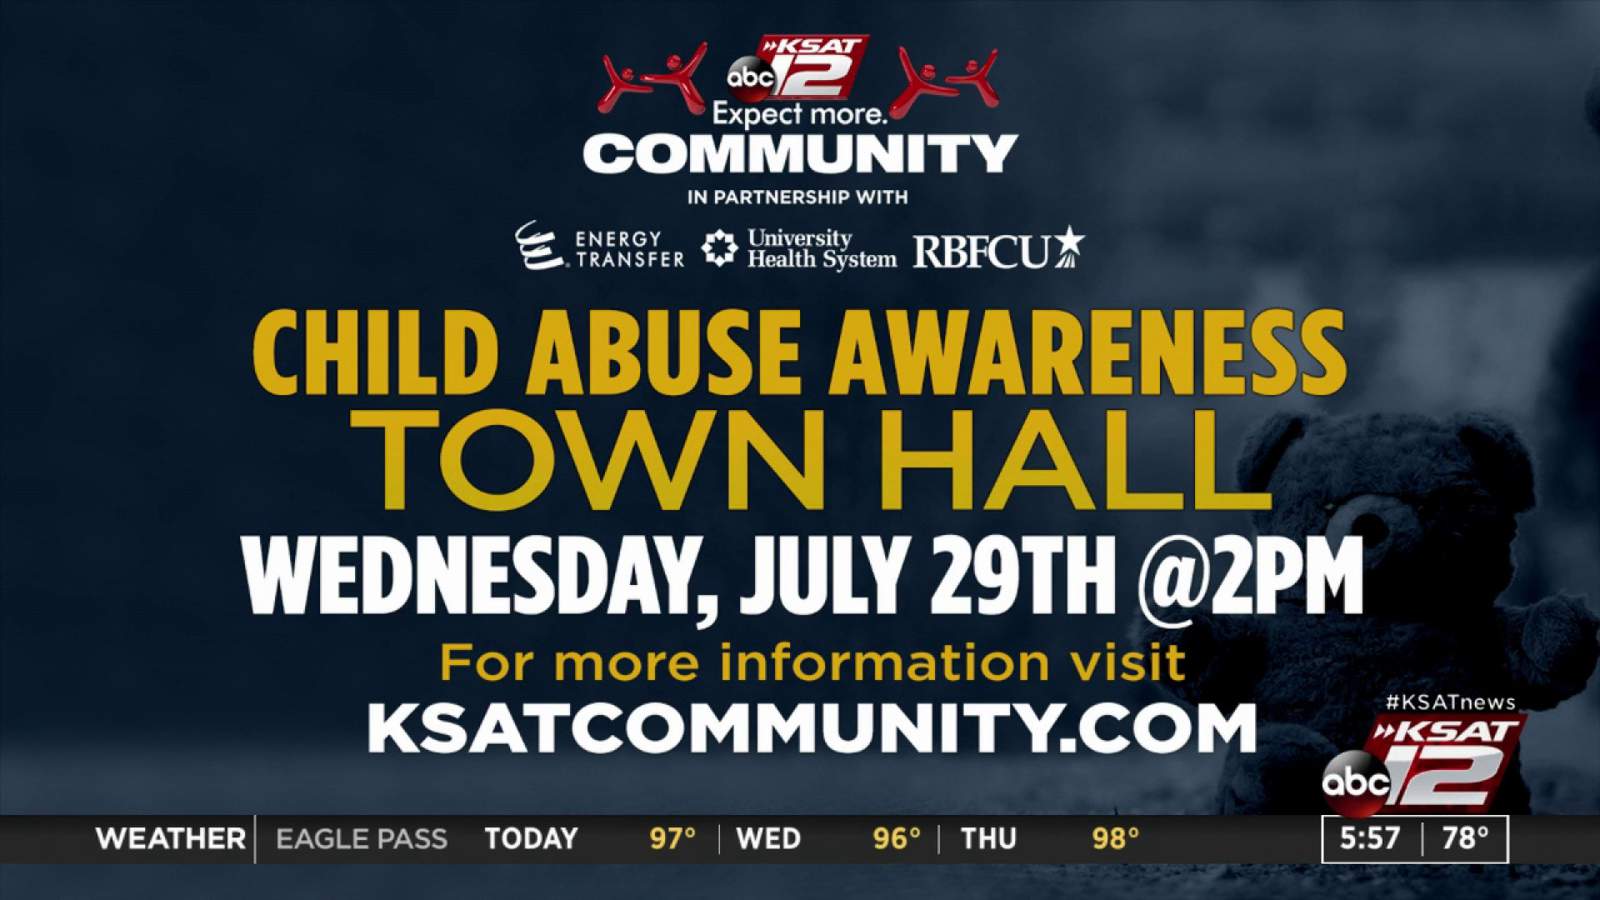 KSAT Community to host Child Abuse Awareness Town Hall Wednesday